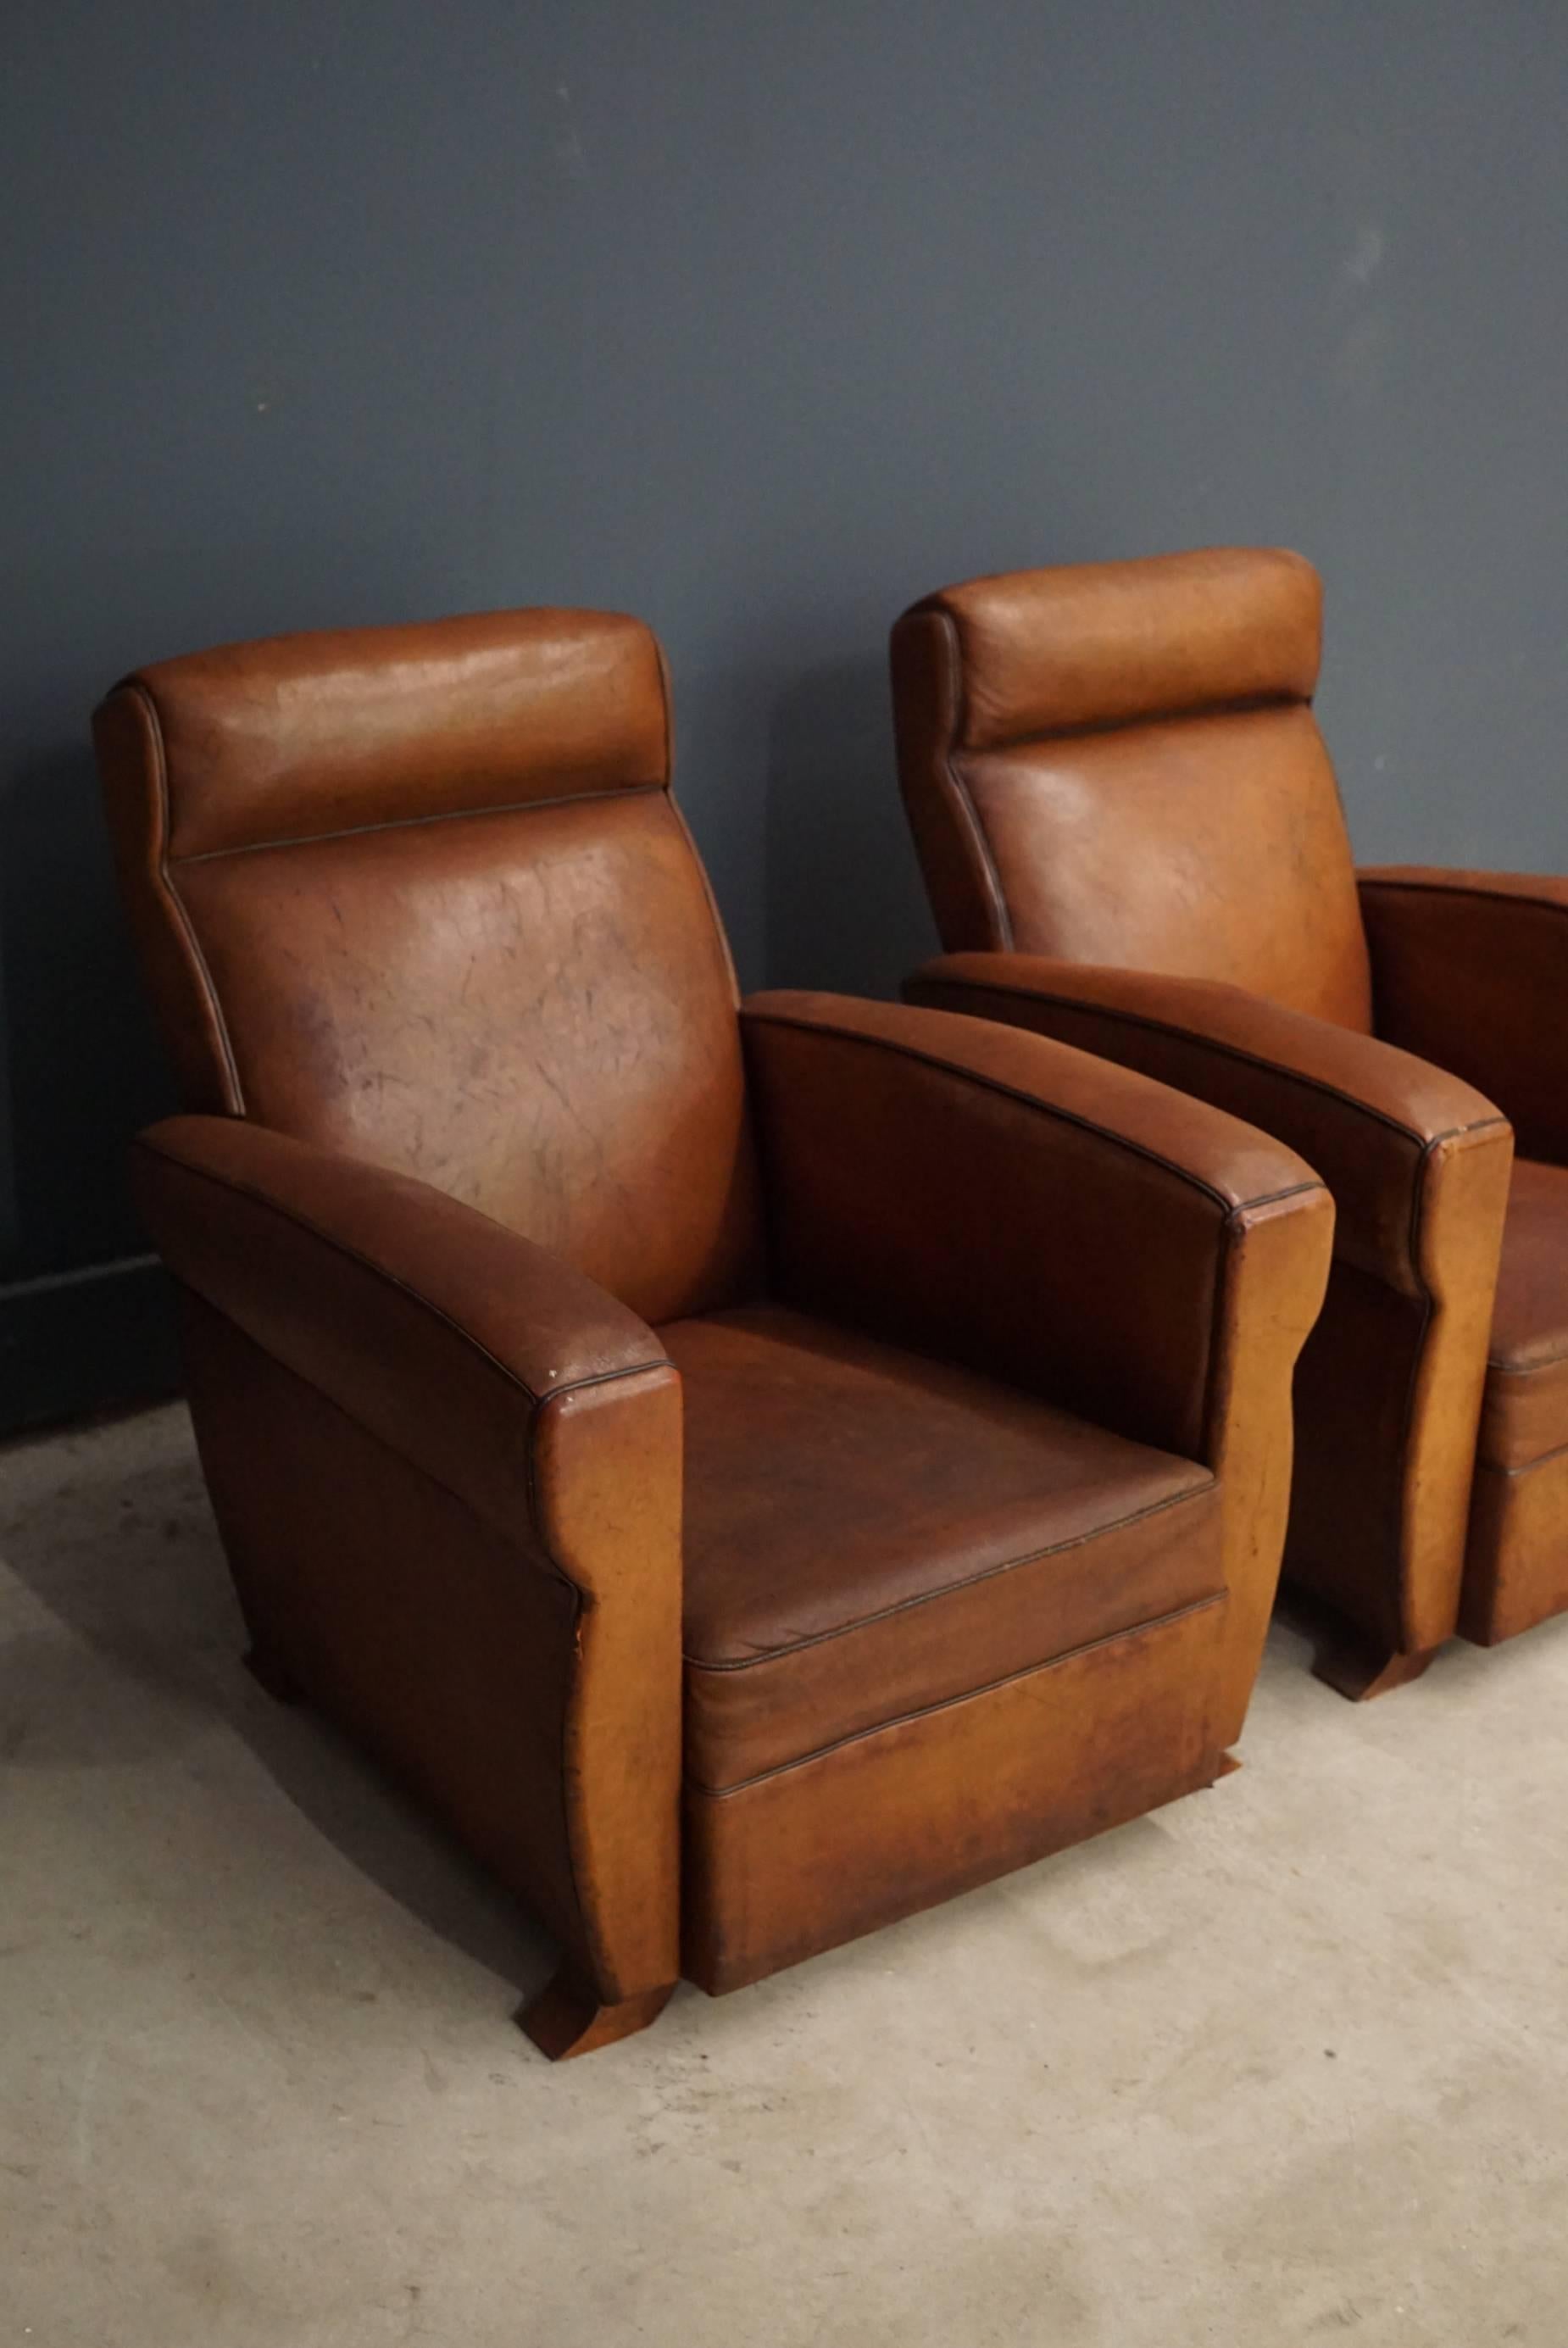 Pair of French Cognac Leather Club Chairs, 1940s (20. Jahrhundert)